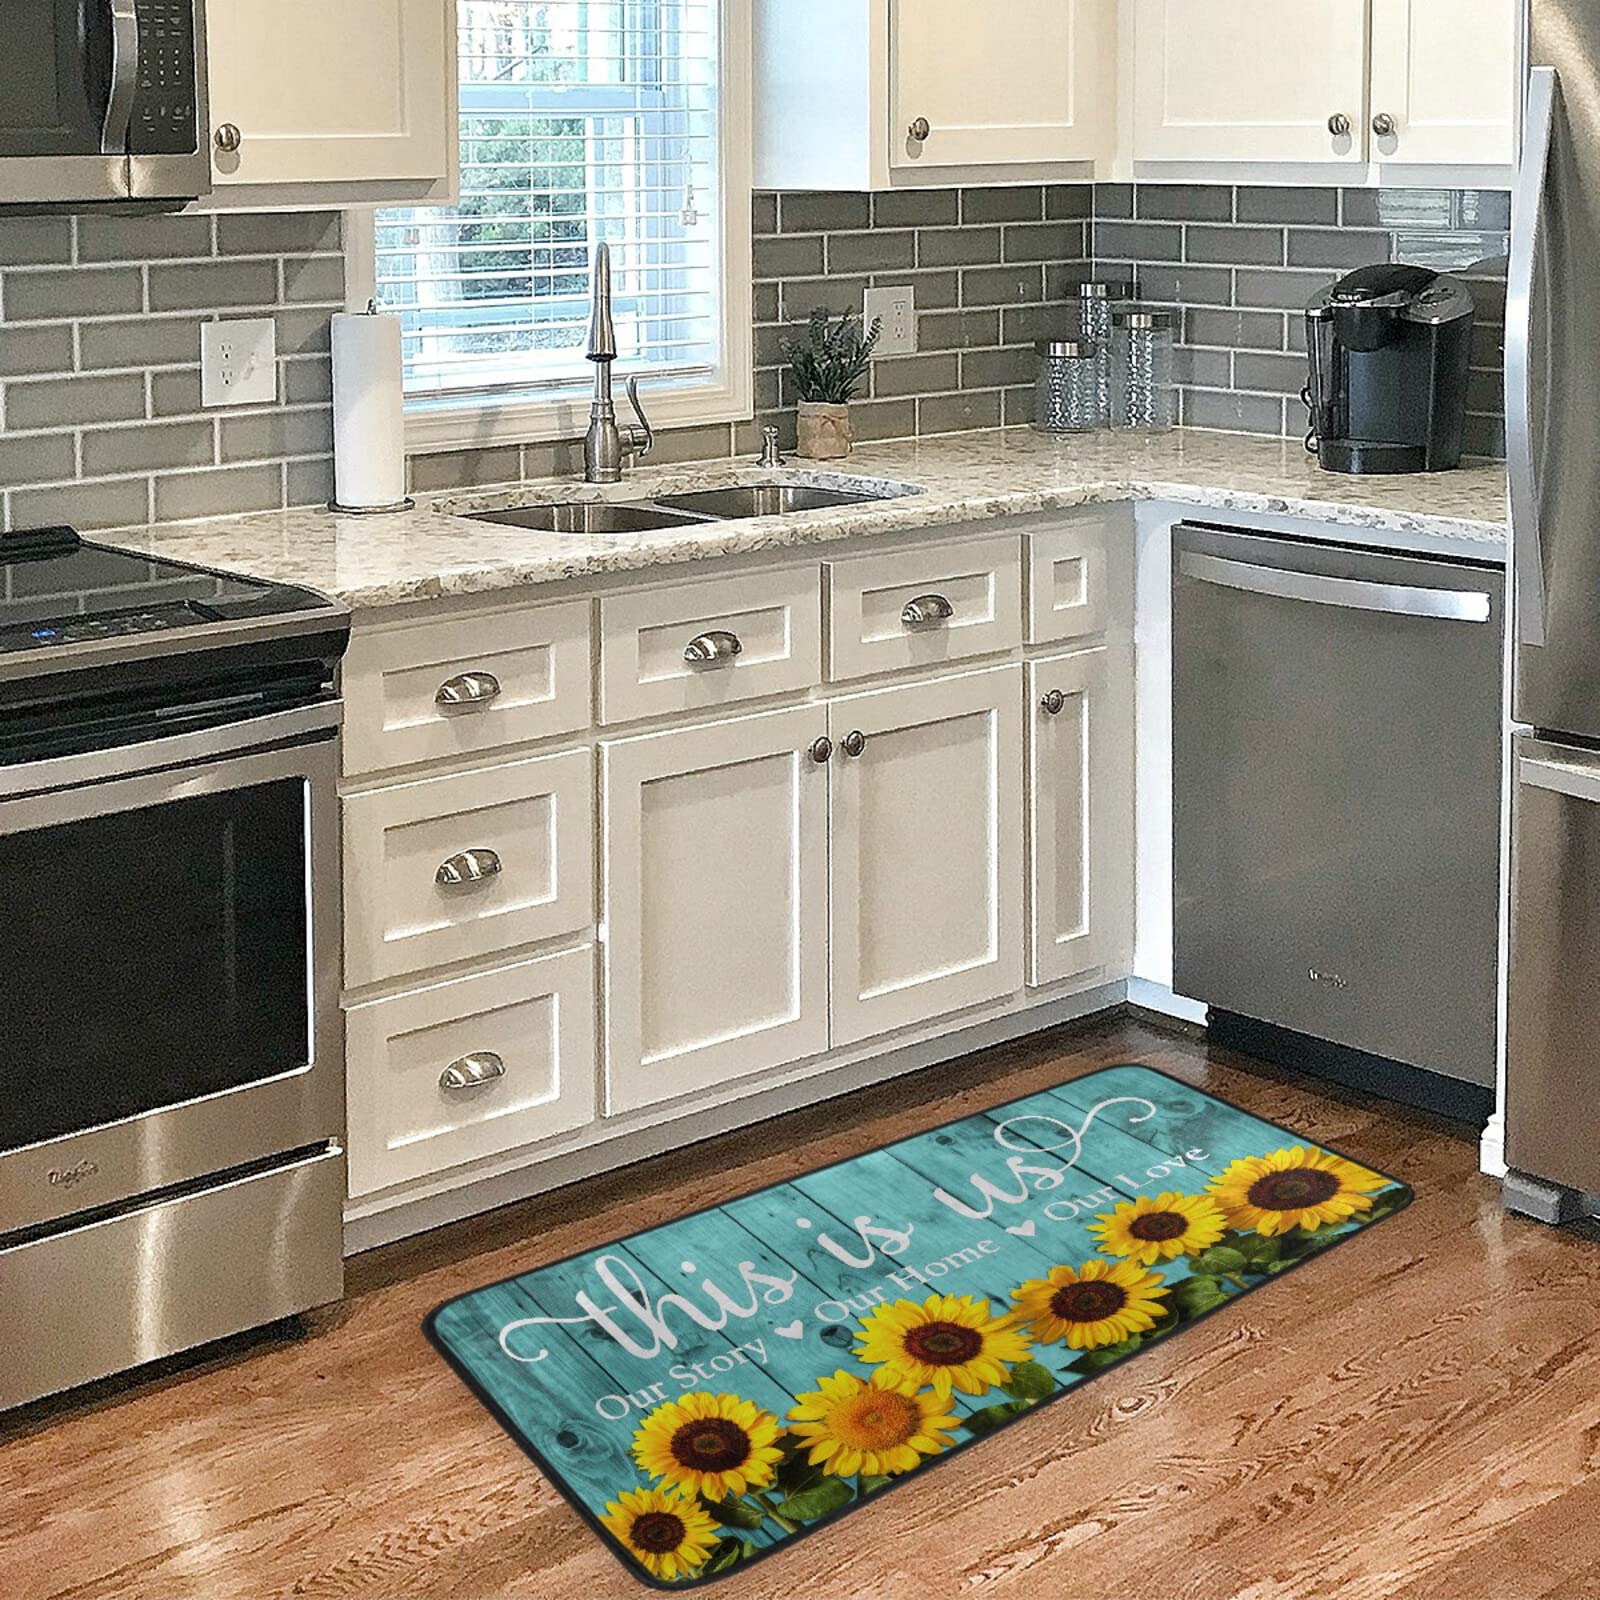 Teal Turquoise Green Wooden Sunflowers Kitchen Rugs Non Slip This is us Our Story Our Home Our Love Kitchen Mats Doormat Bathroom Runner Area Rug for Kitchen Decor, Washable, 39 x 20 Inch